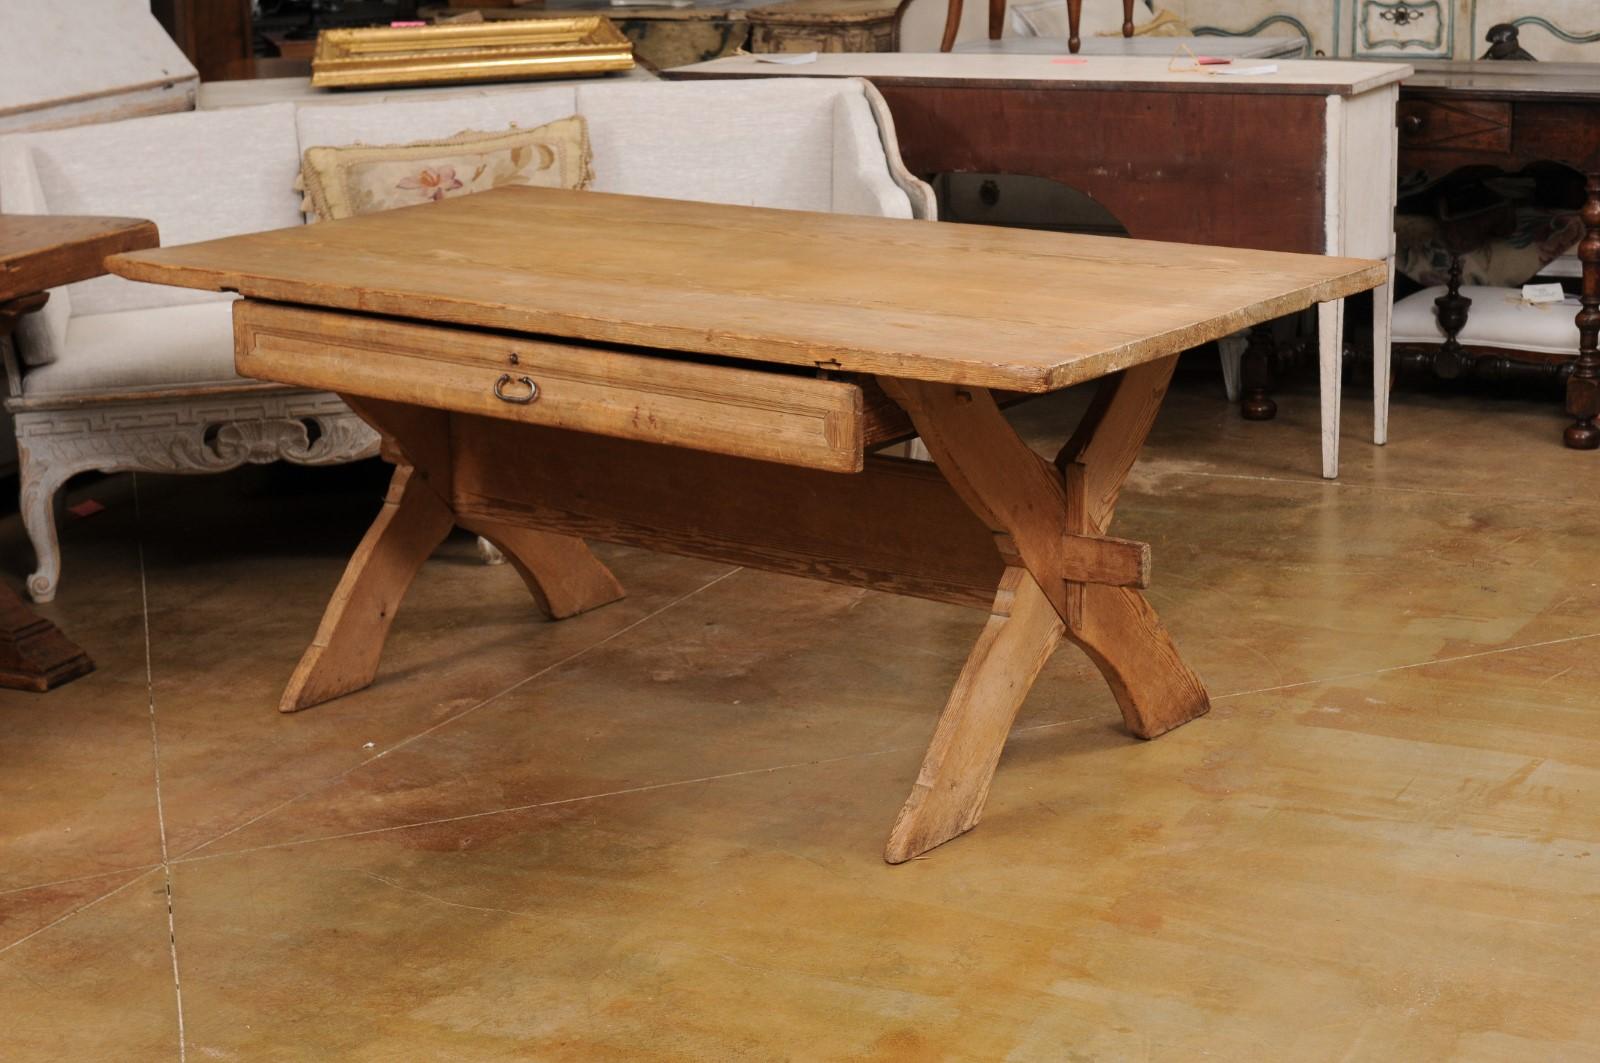 Swedish 1790s European Pine Sawbuck Table with Drawer and Double X-Form Legs For Sale 5